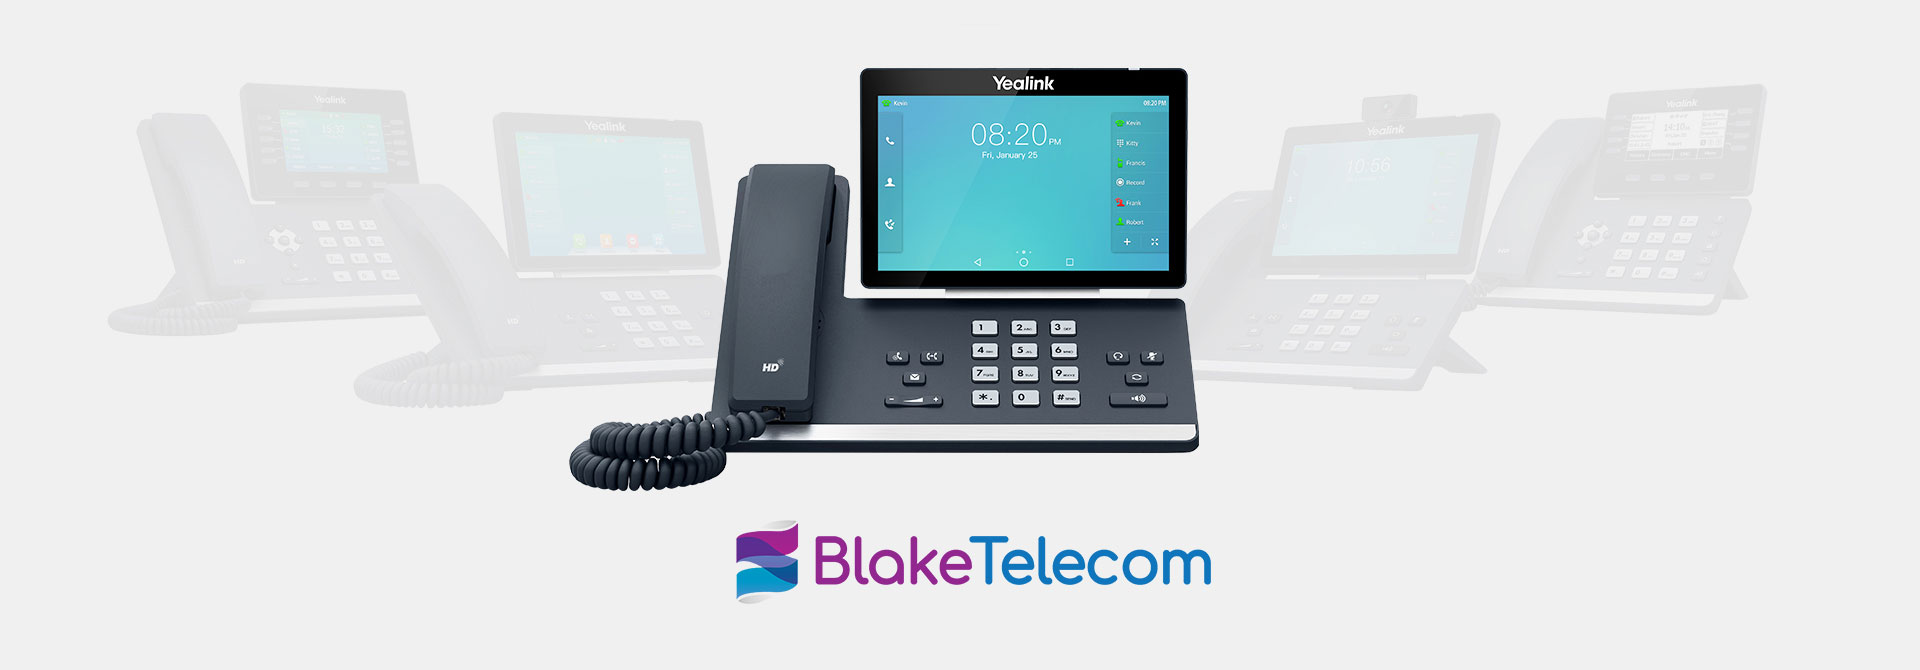 Blake Telecom Telephone systems and super fast internet